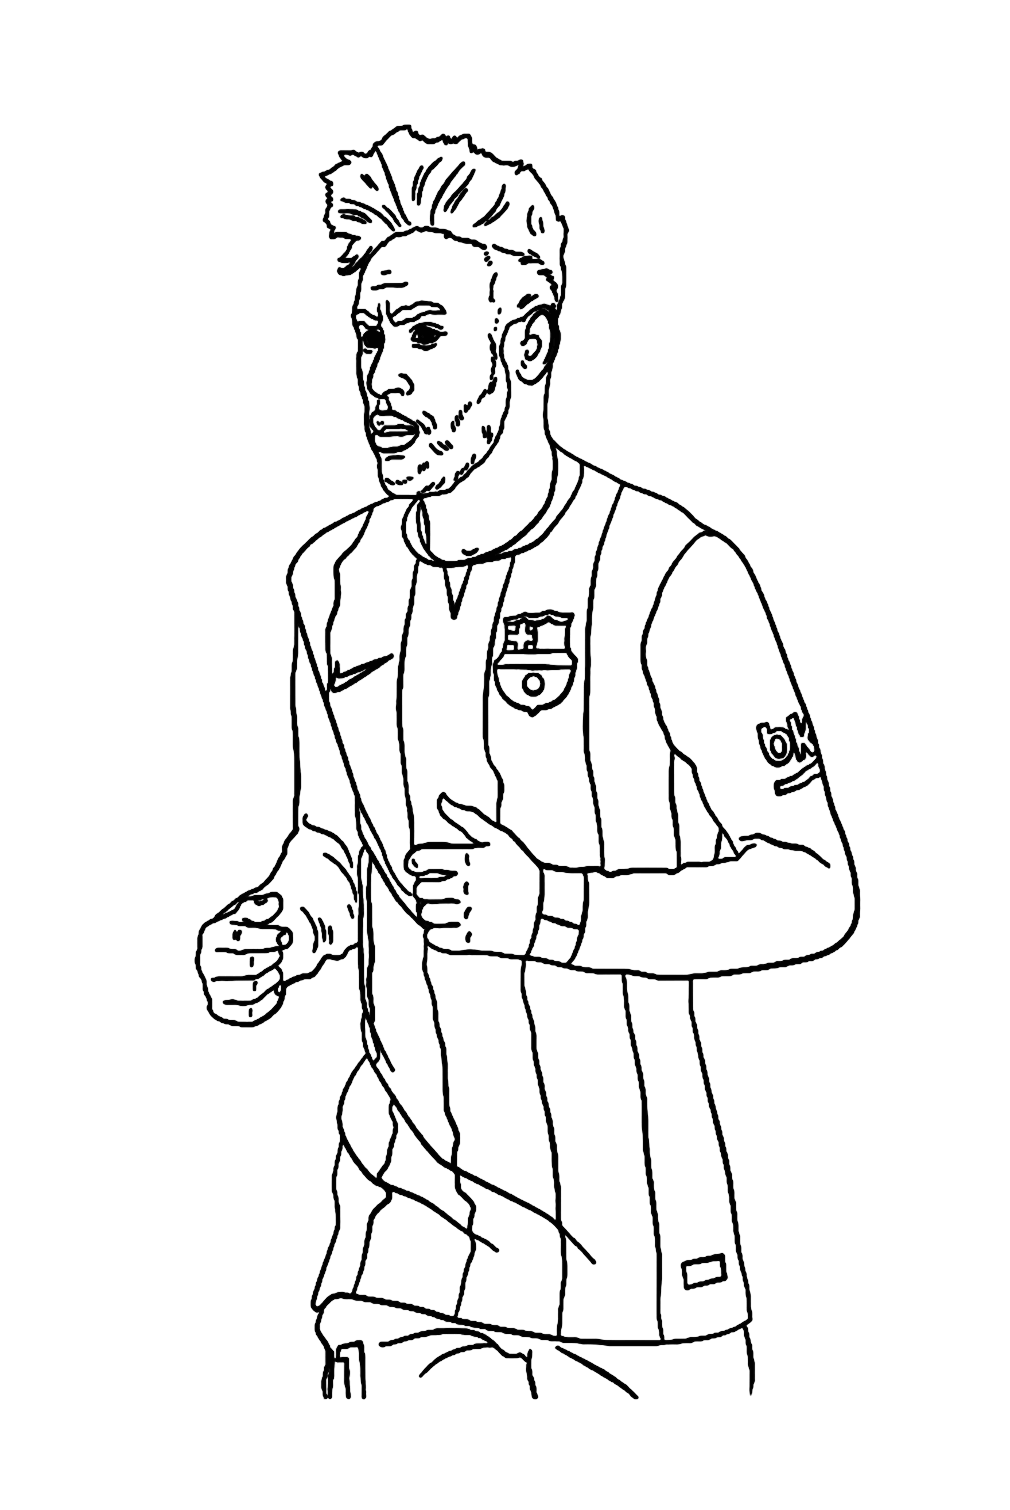 Neymar coloring pages